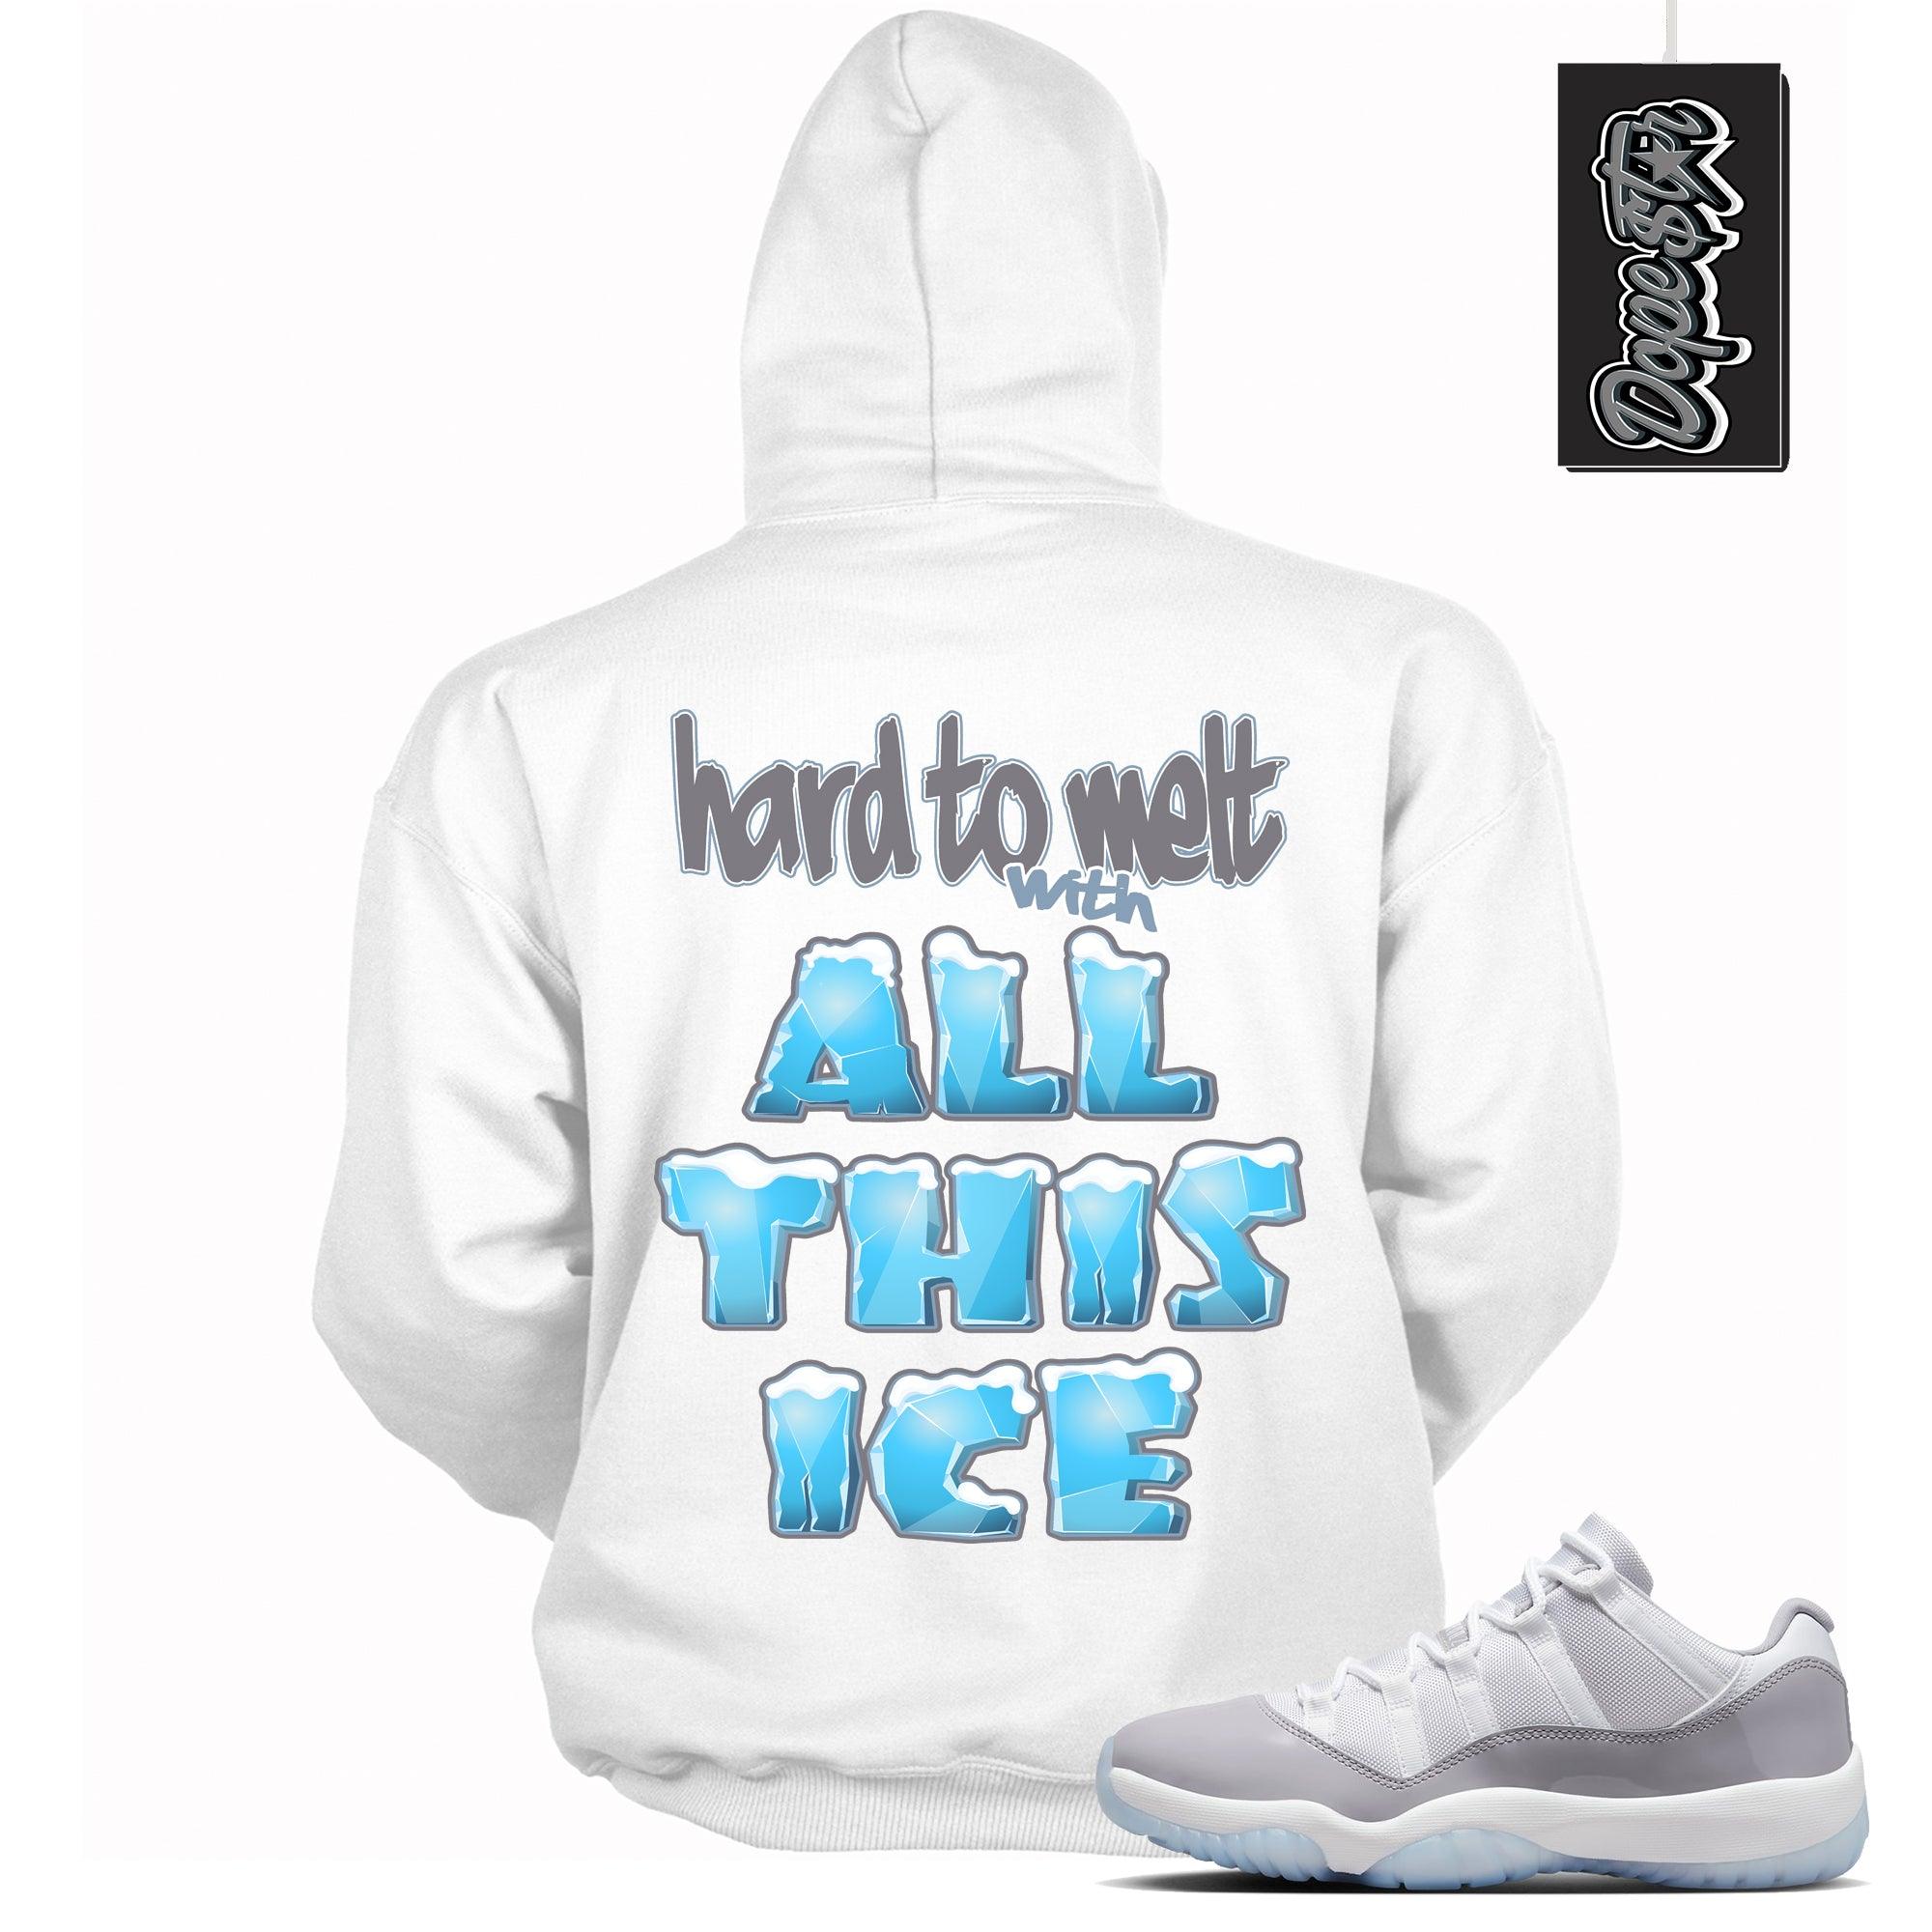 Cool White Graphic Hoodie with “ All This Ice “ print, that perfectly matches Air Jordan 11 Retro Low Cement Grey sneakers